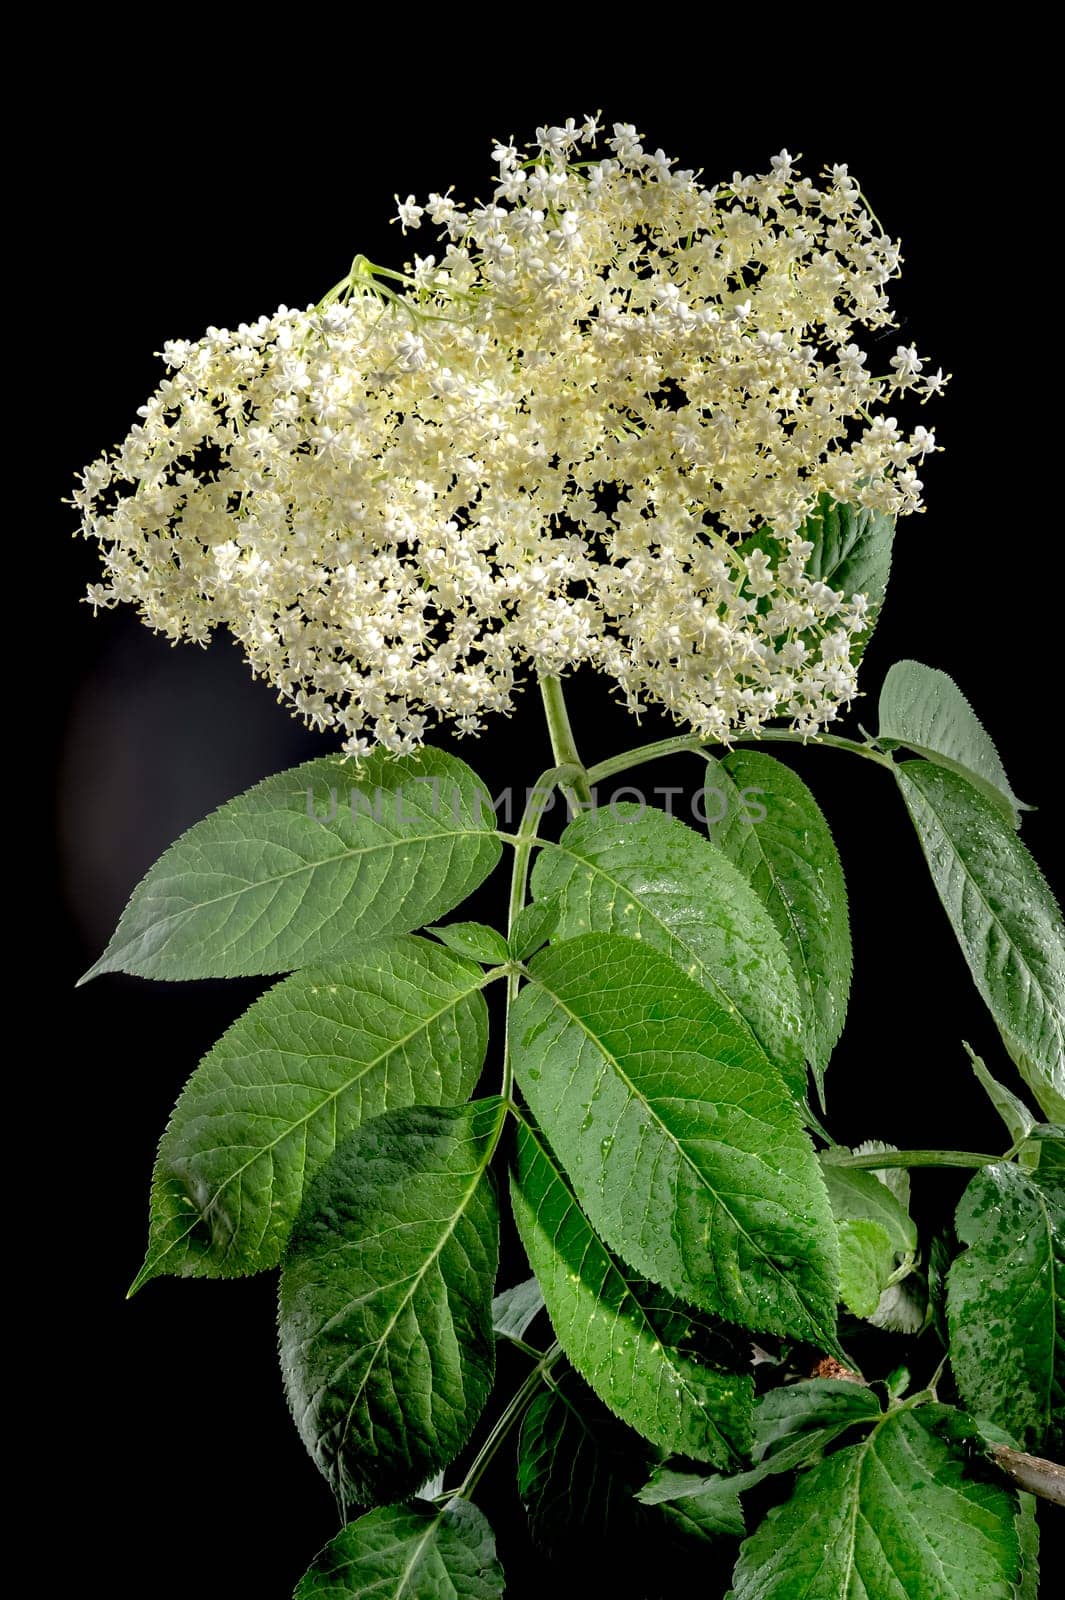 Beautiful Blooming white sambucus isolated on a black background. Flower head close-up.